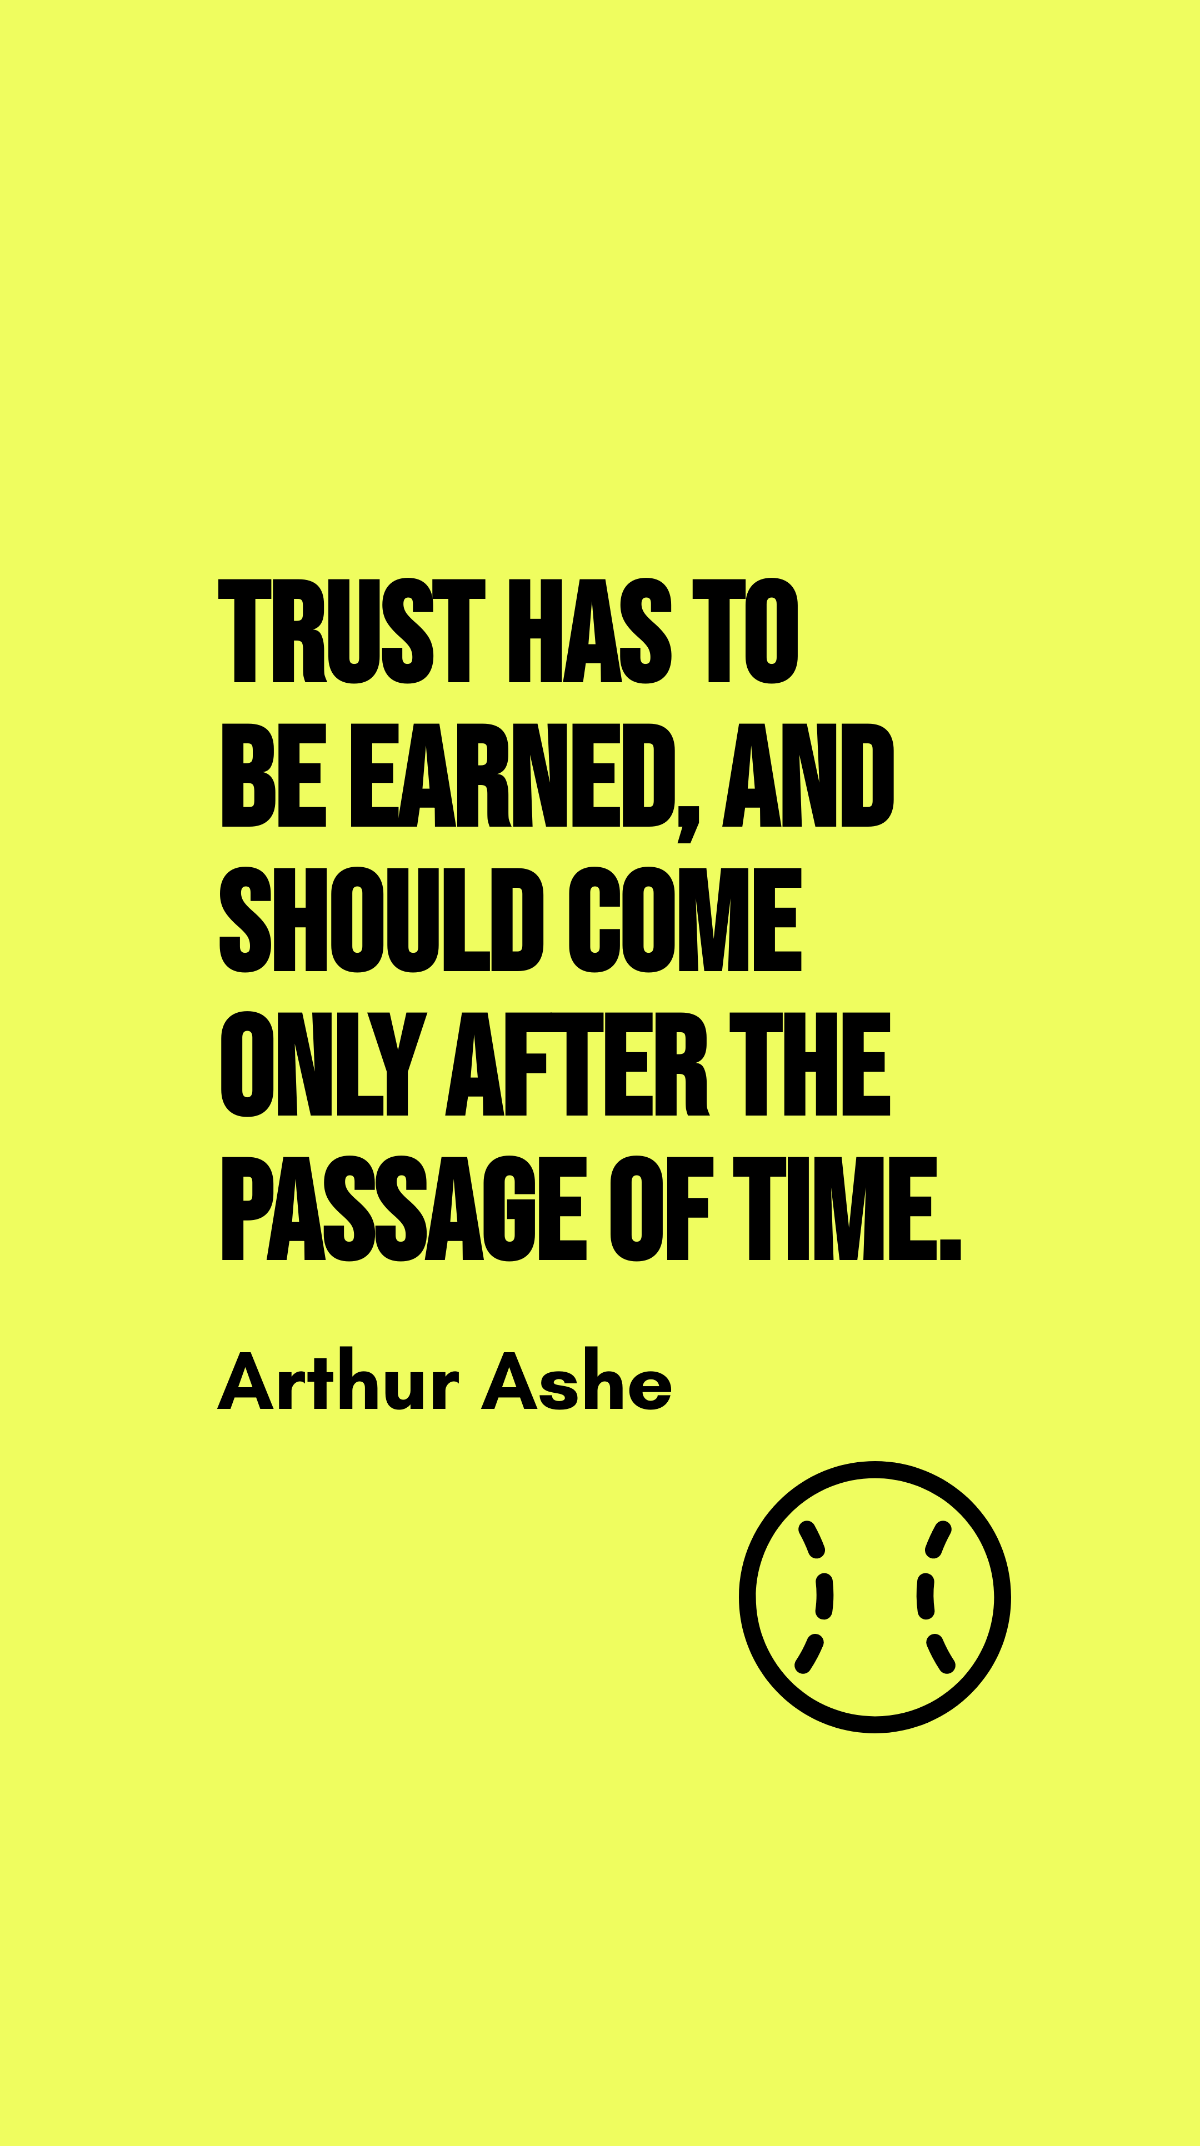 Arthur Ashe - Trust has to be earned, and should come only after the passage of time.